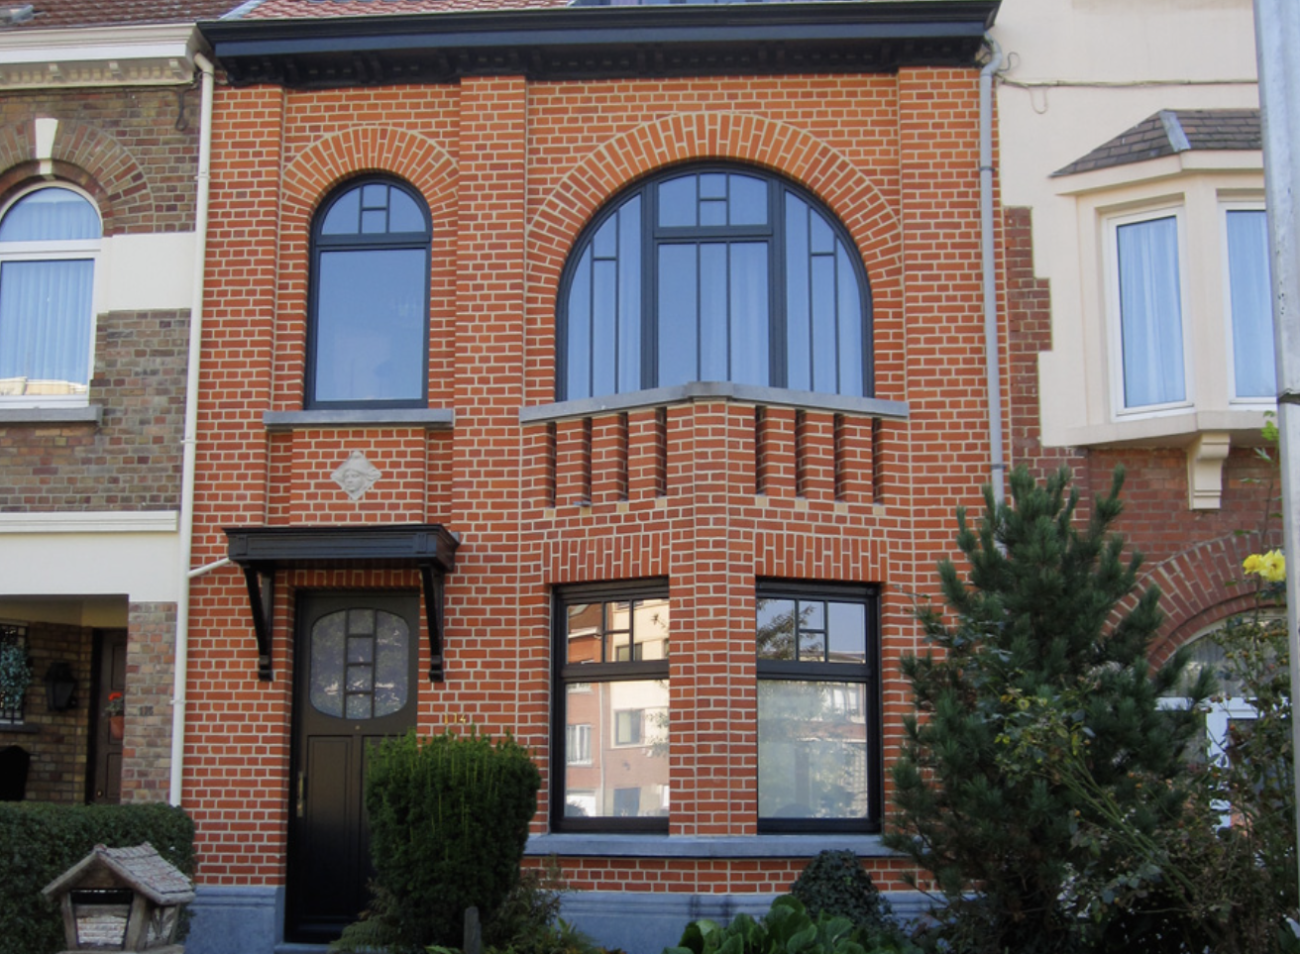 Two-story building with restored red bricks, with half-moon windows and a black door